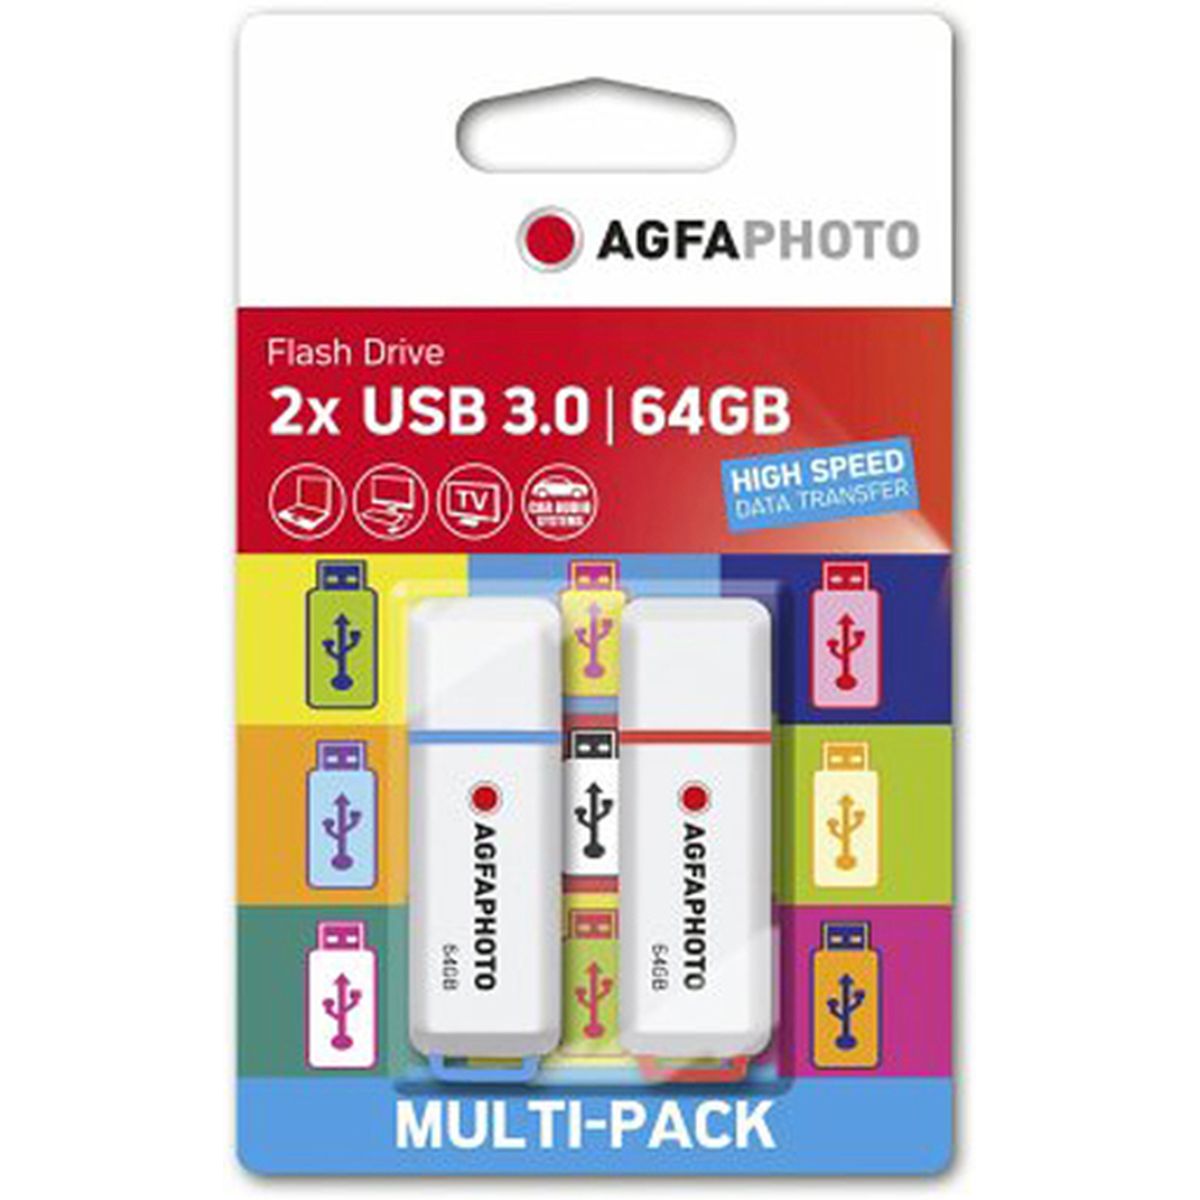 AgfaPhoto USB-Stick 64GB, 2er Pack Color Mix, USB 3.0 Type-A (15/55 MBs)